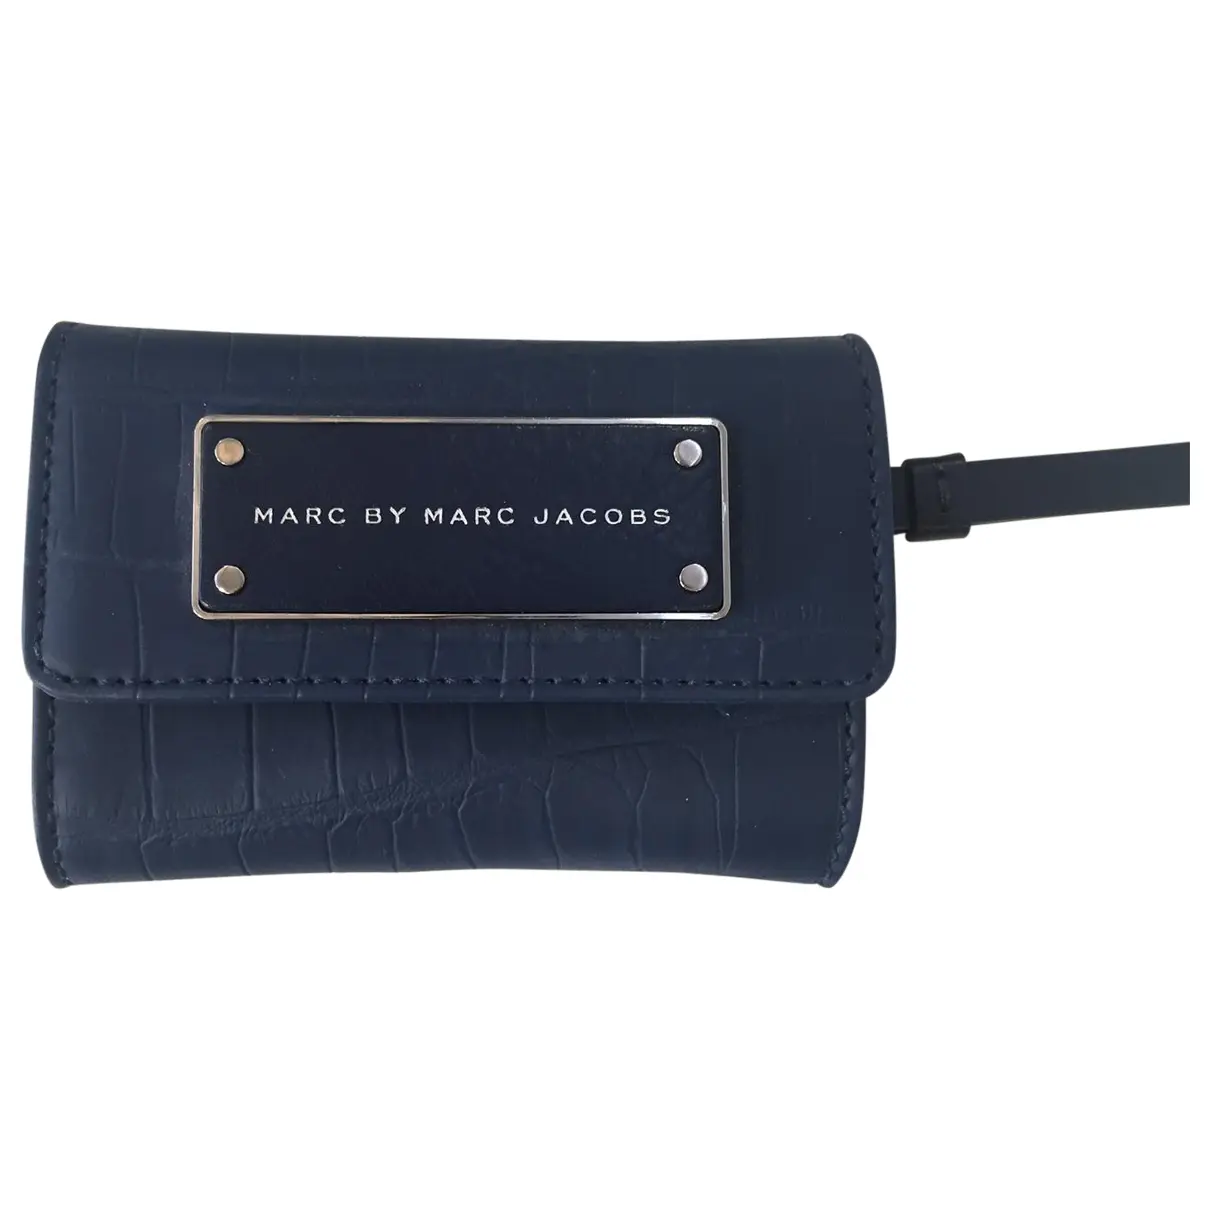 Card wallet Marc by Marc Jacobs